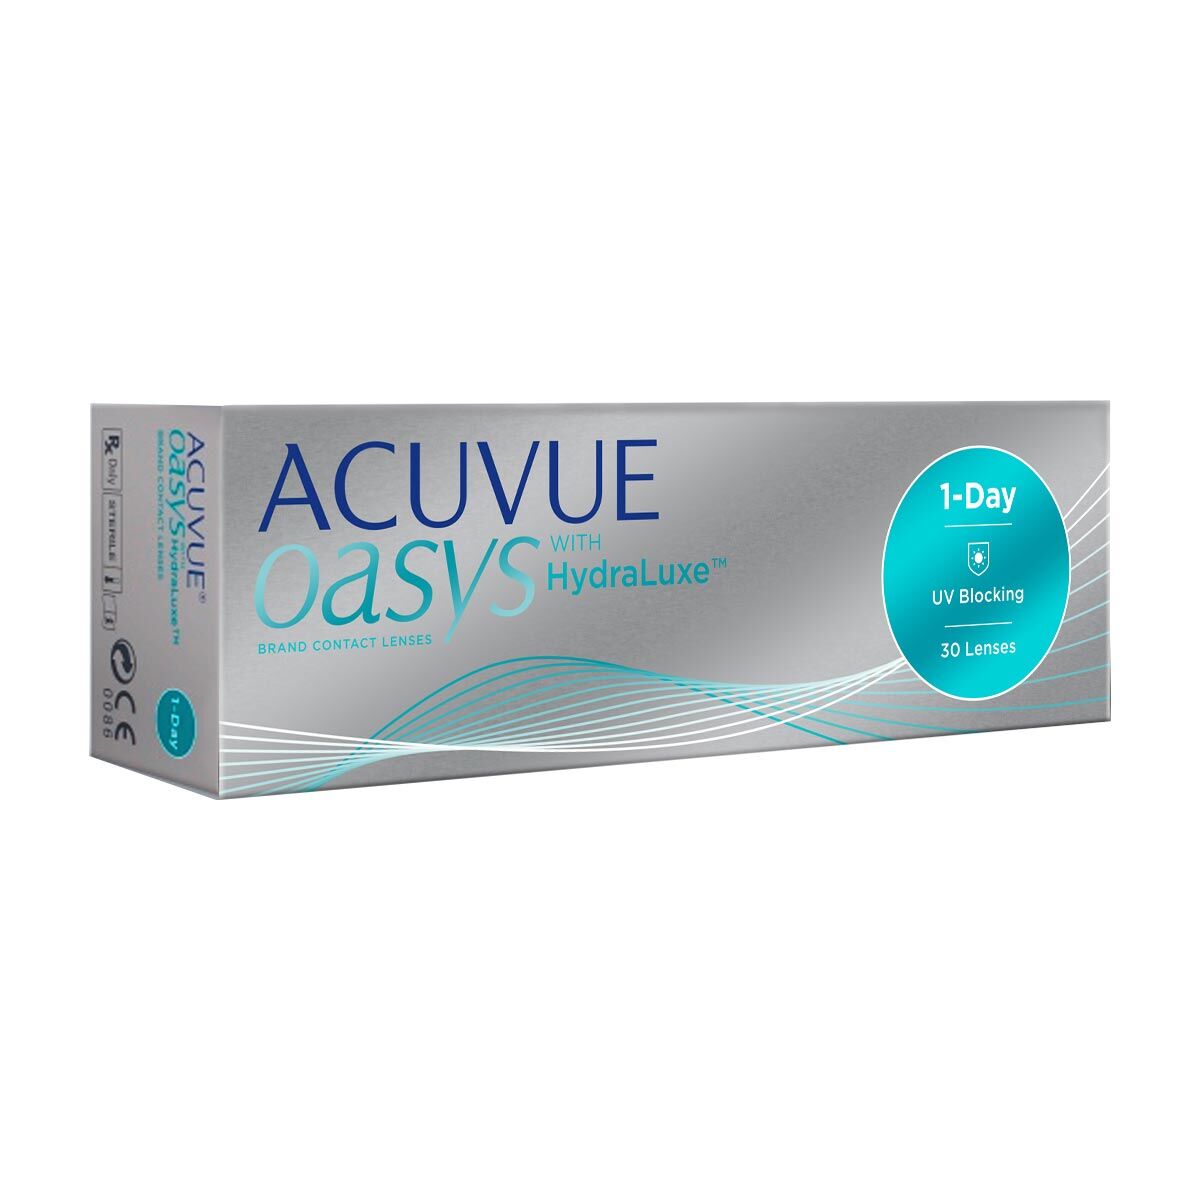 ACUVUE Oasys 1 Day +6.50